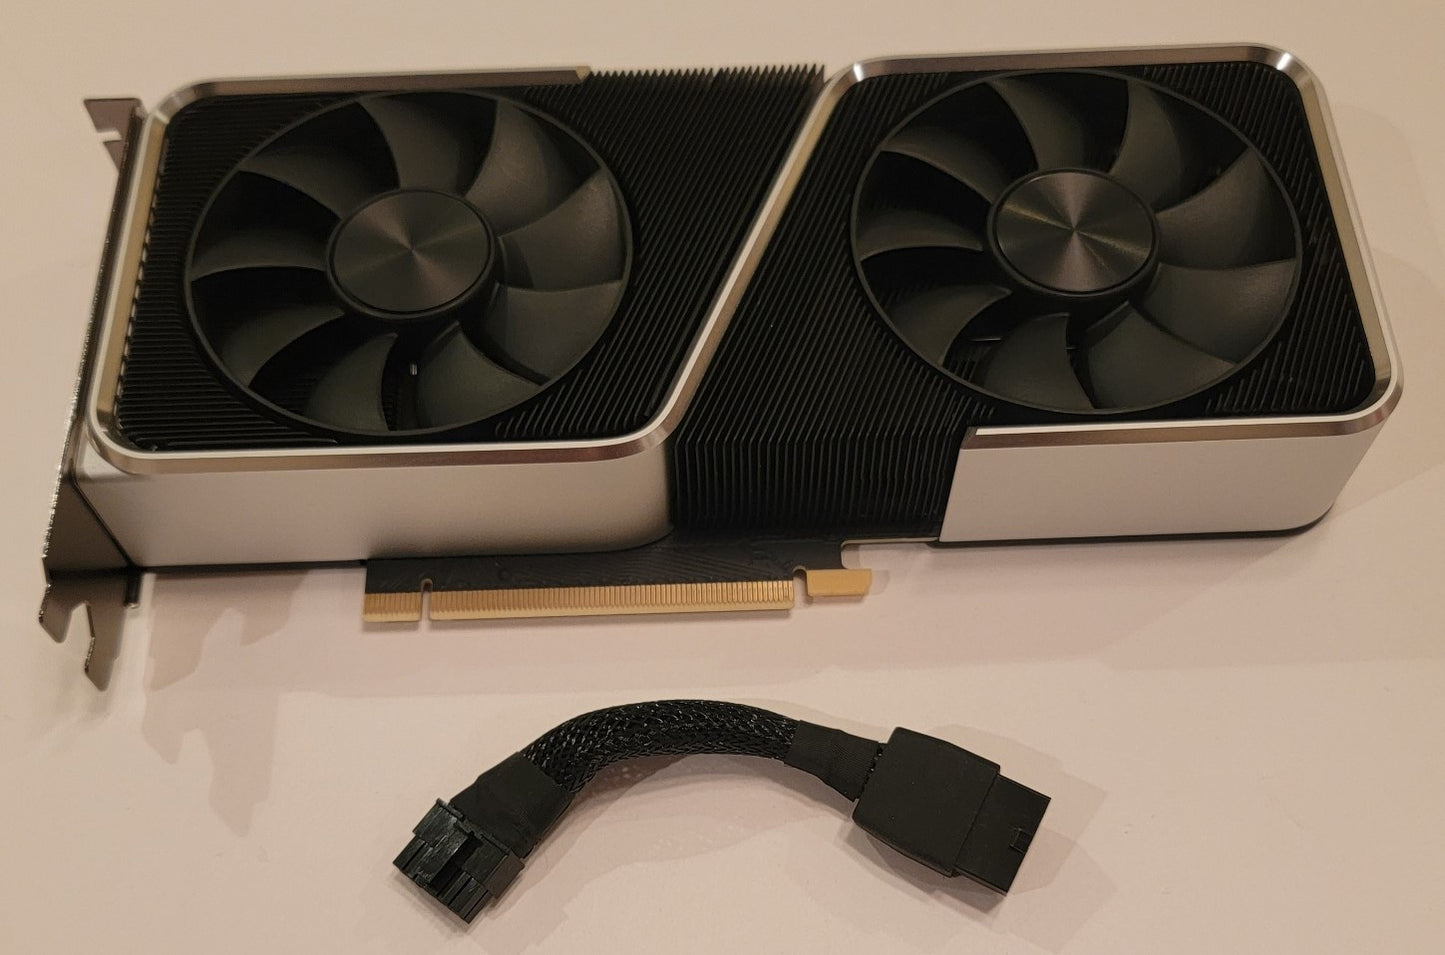 NVIDIA GeForce RTX 3060 Ti Founders Edition